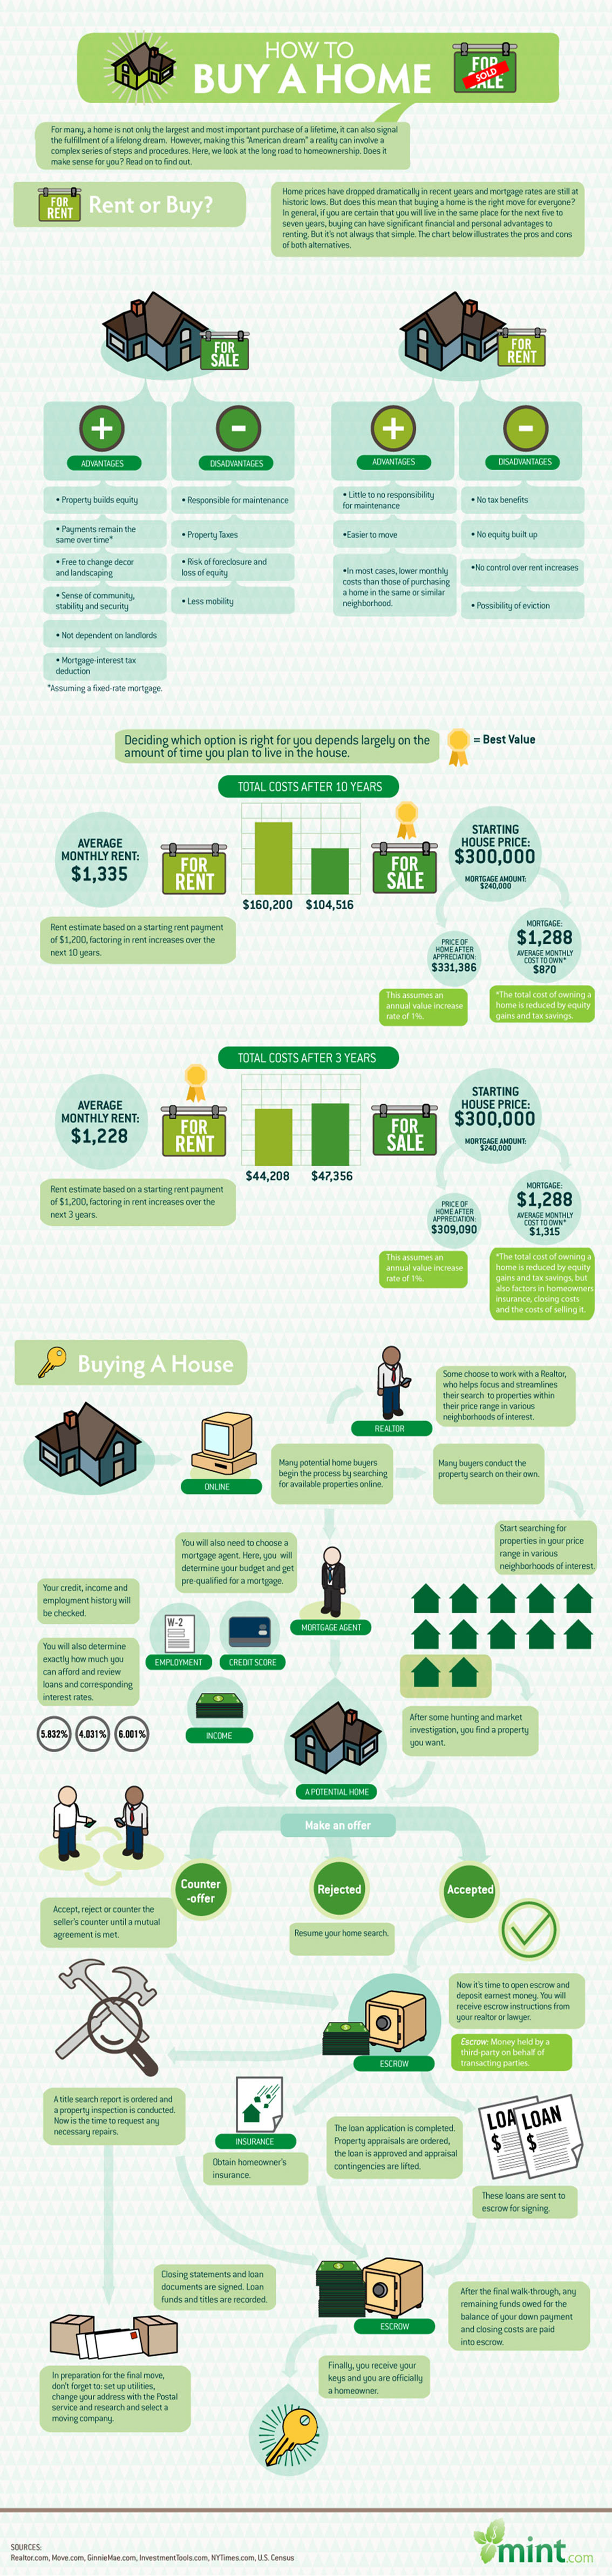 The Cost of Renting vs Buying a Home - Real Estate Infographic